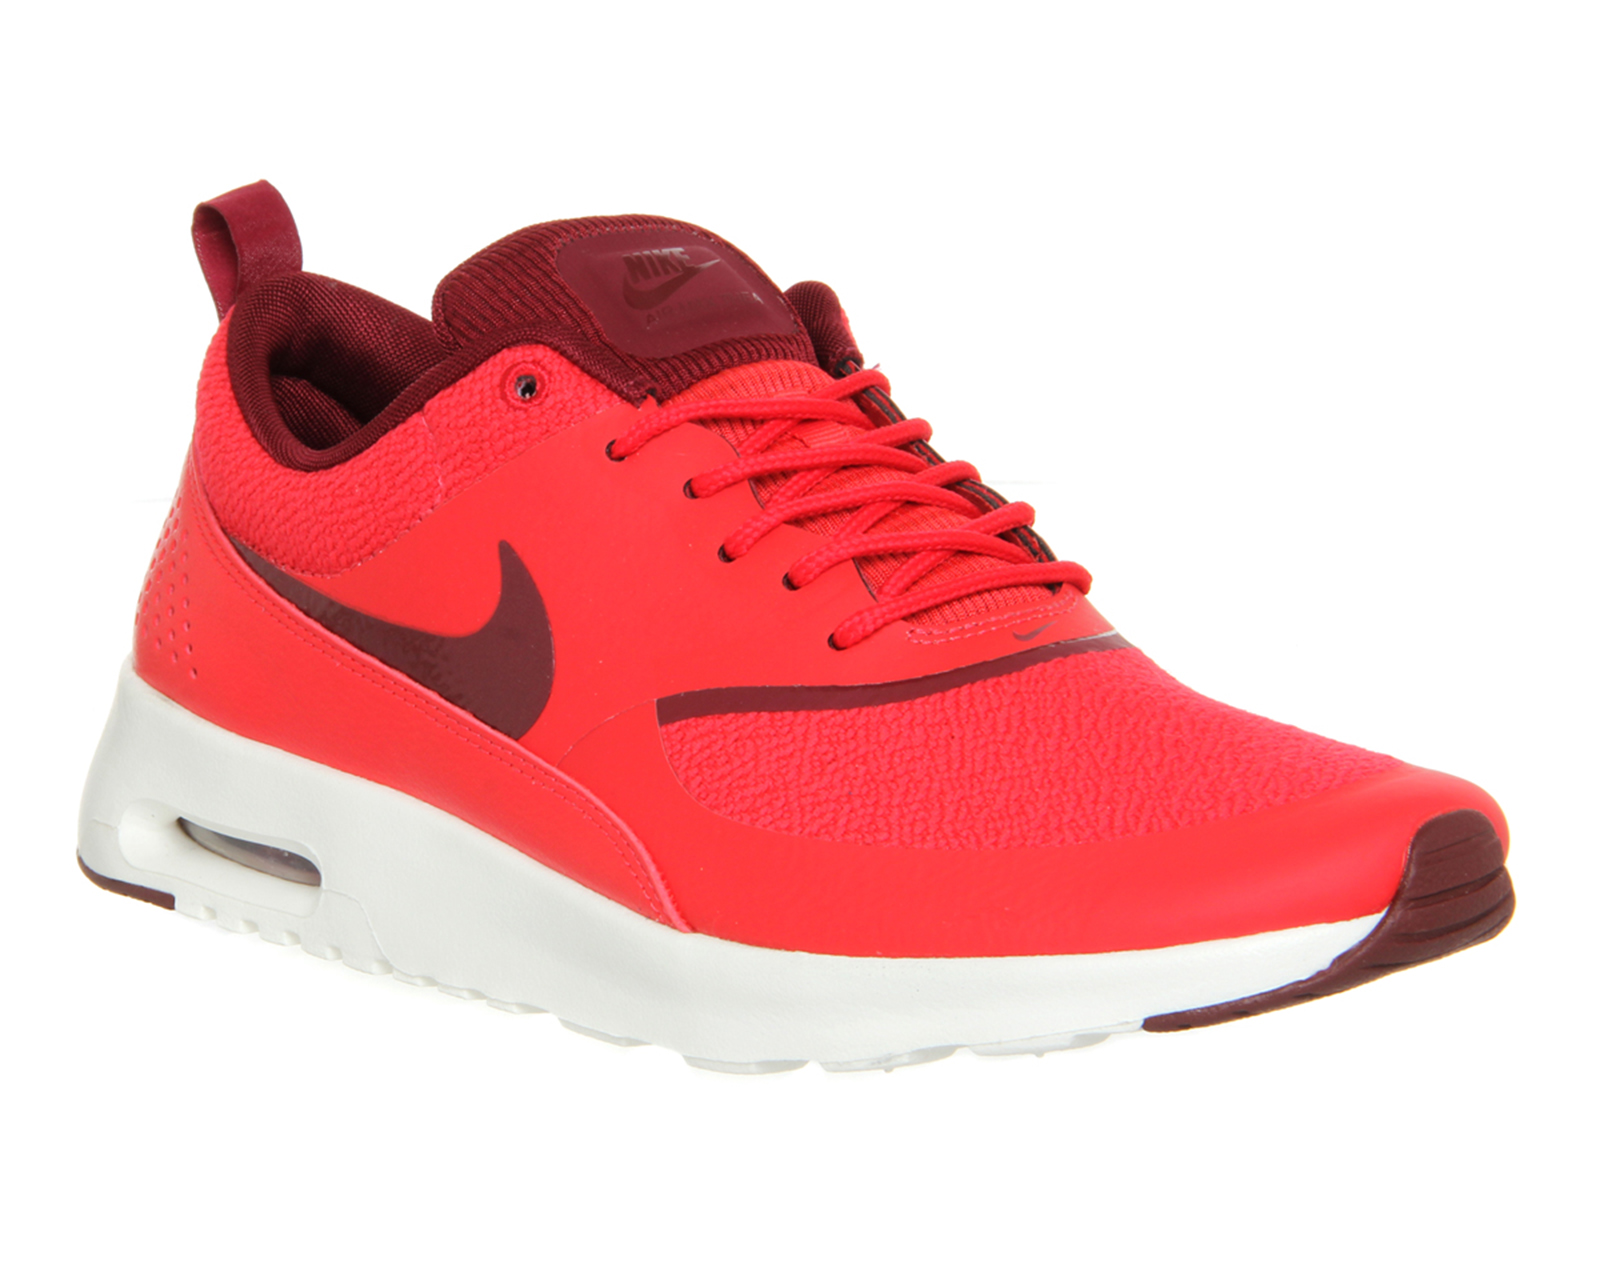 Nike Air Max Thea Action Red Team Red Sail - junior